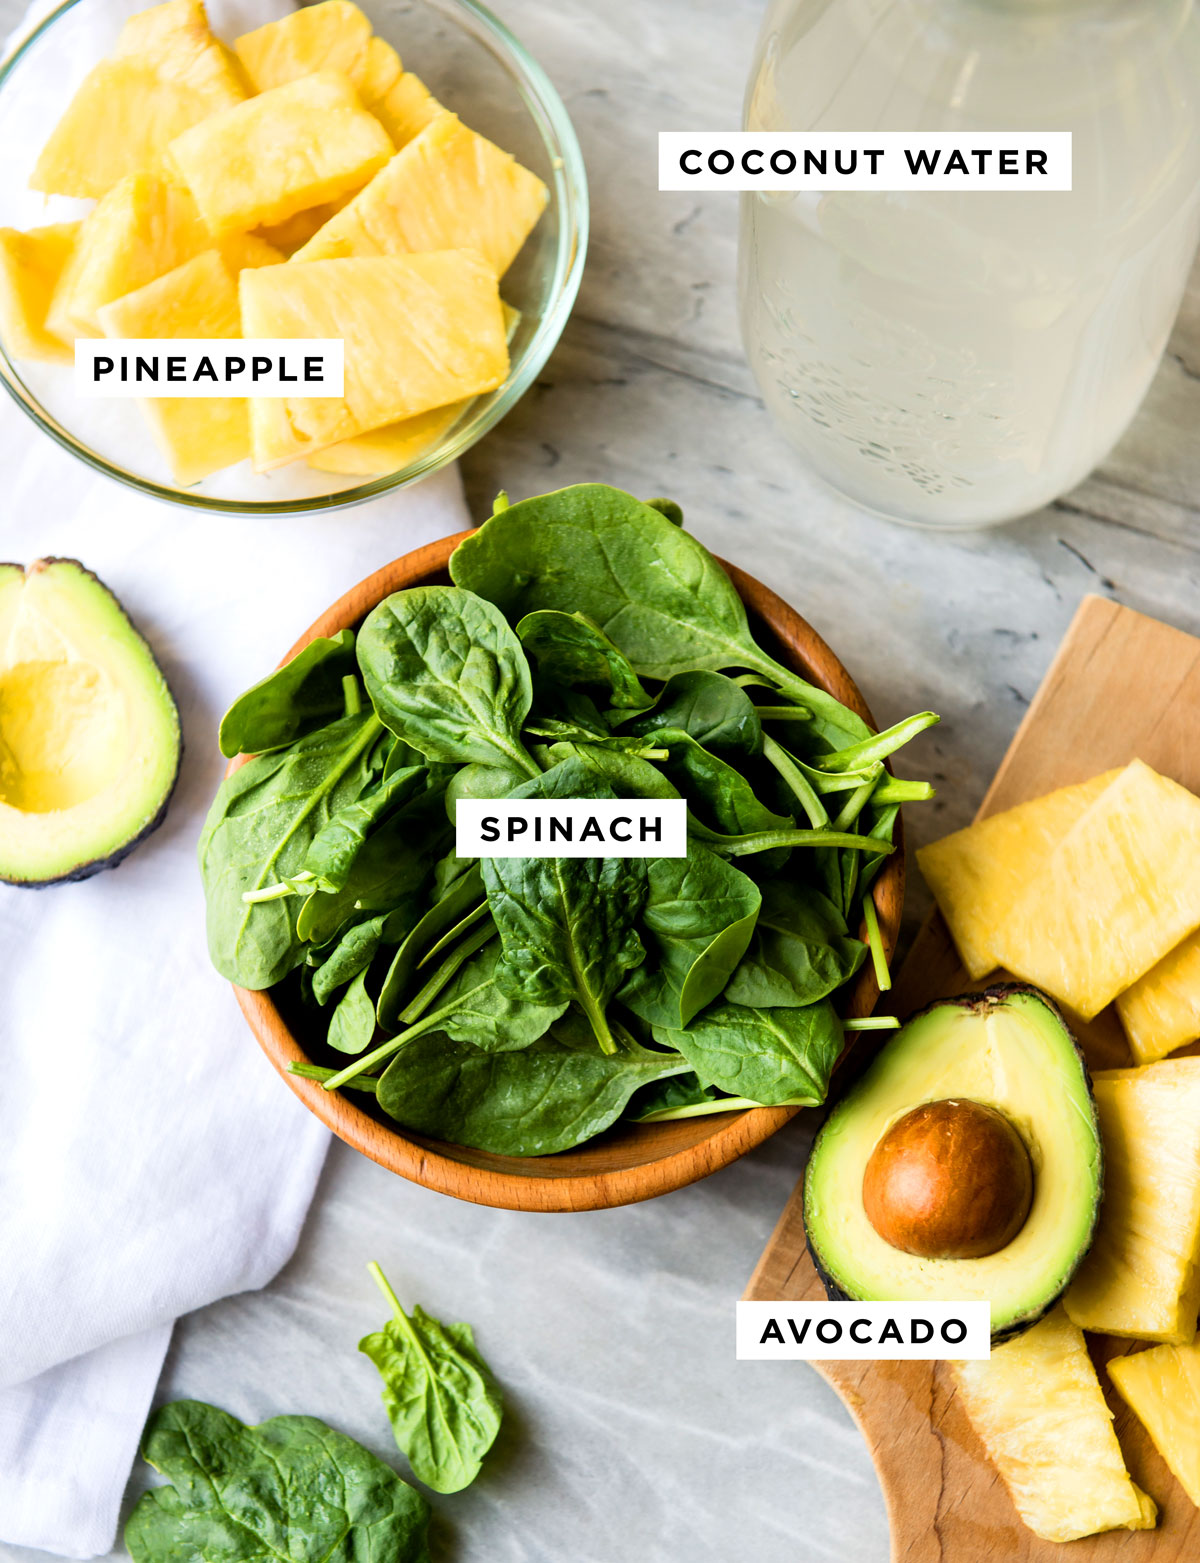 labeled ingredients for a clear skin smoothie including coconut water, pineapple, spinach and avocado.